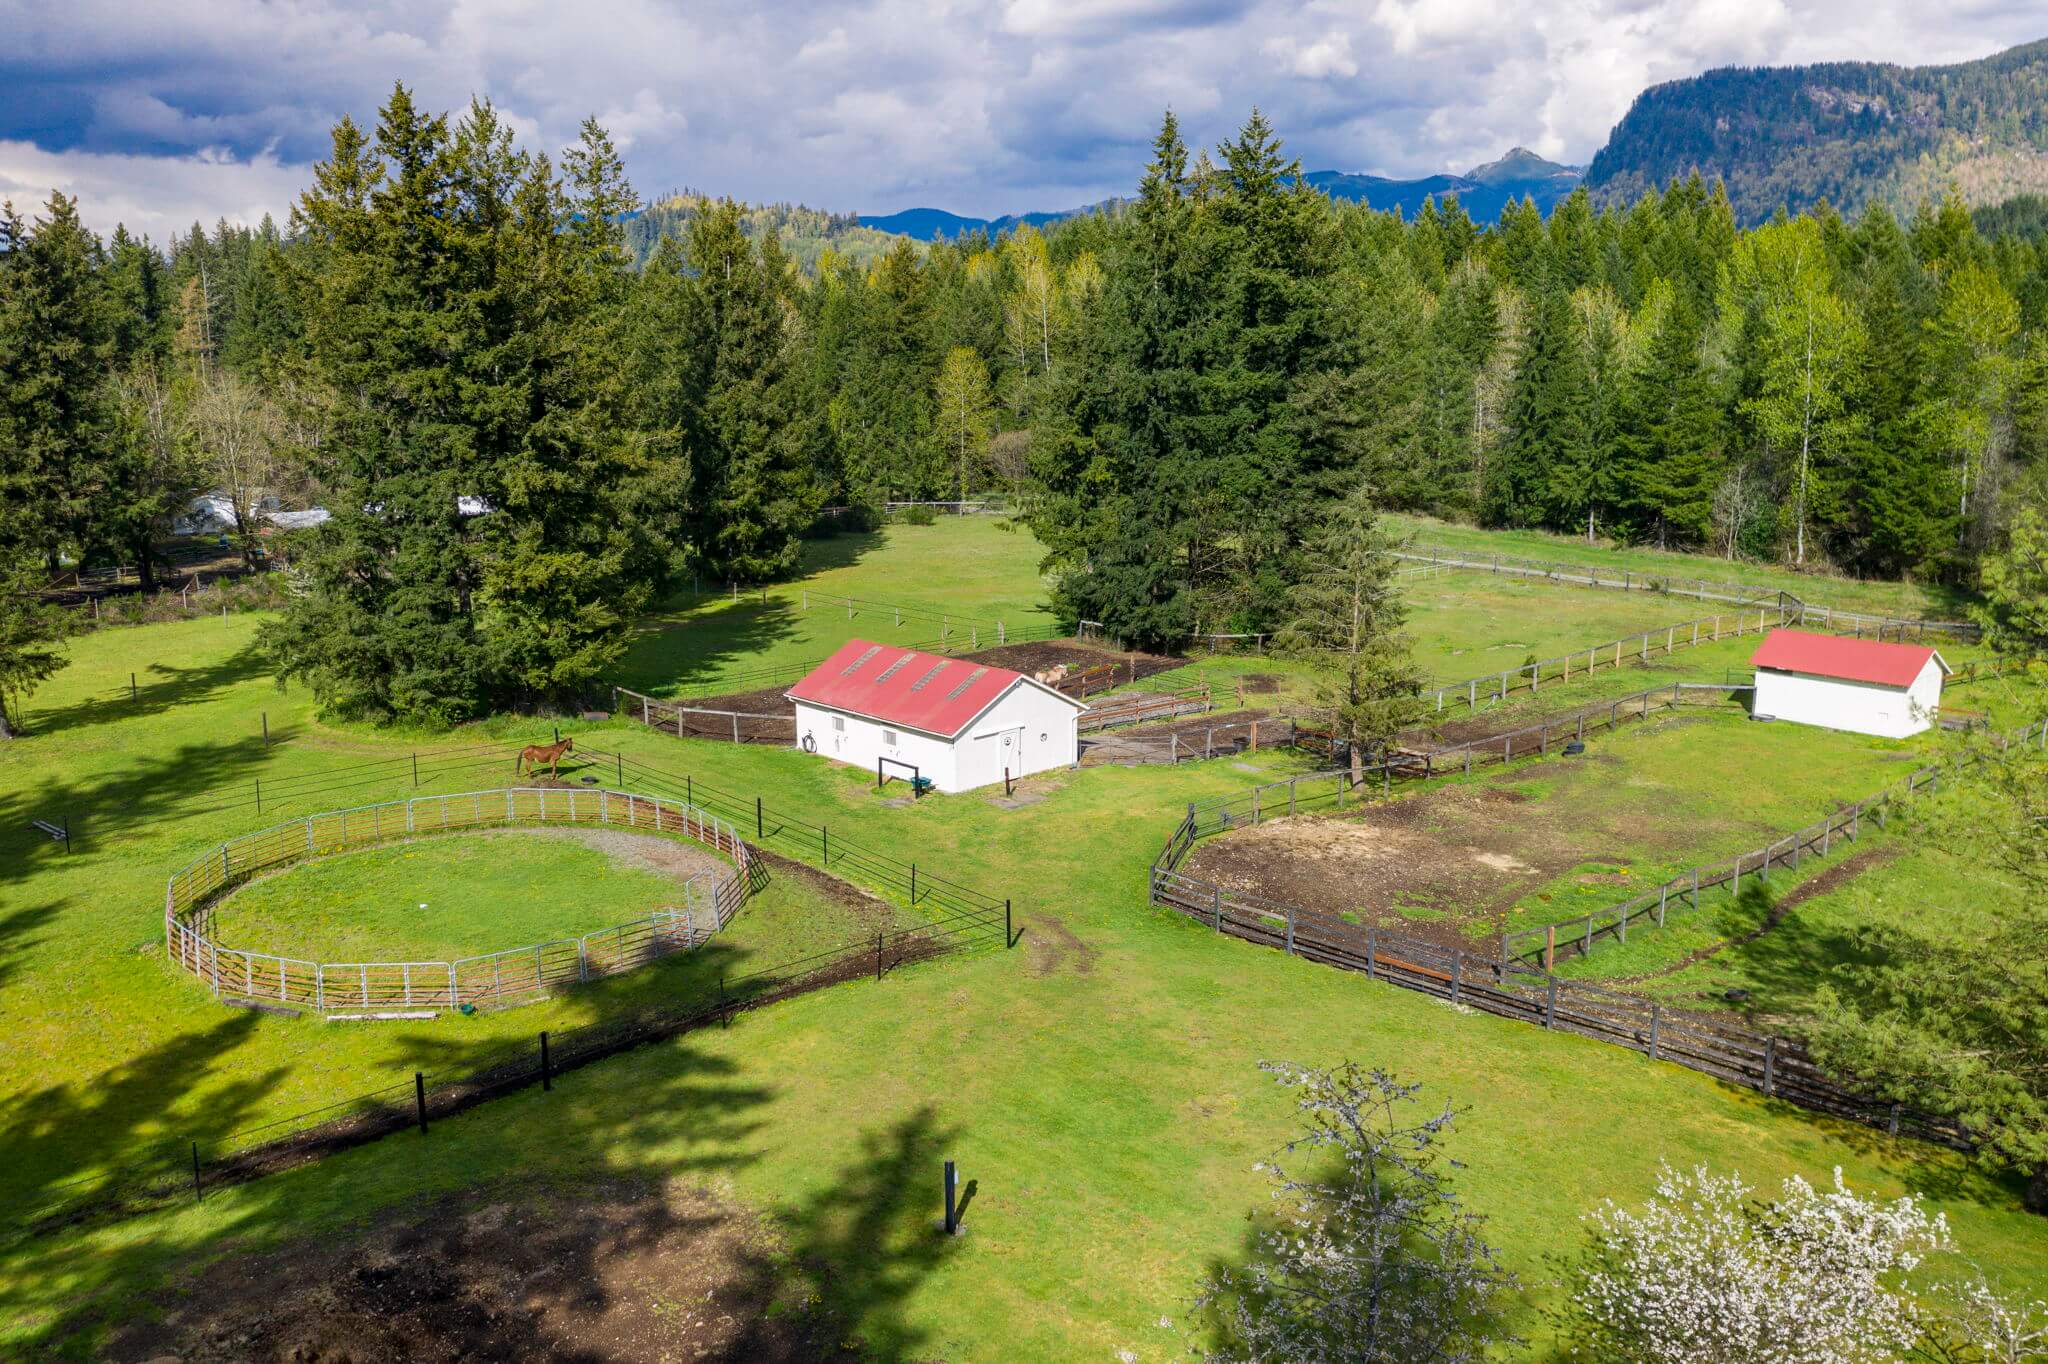 Seven separate fully fenced pastures and a 60' round pen